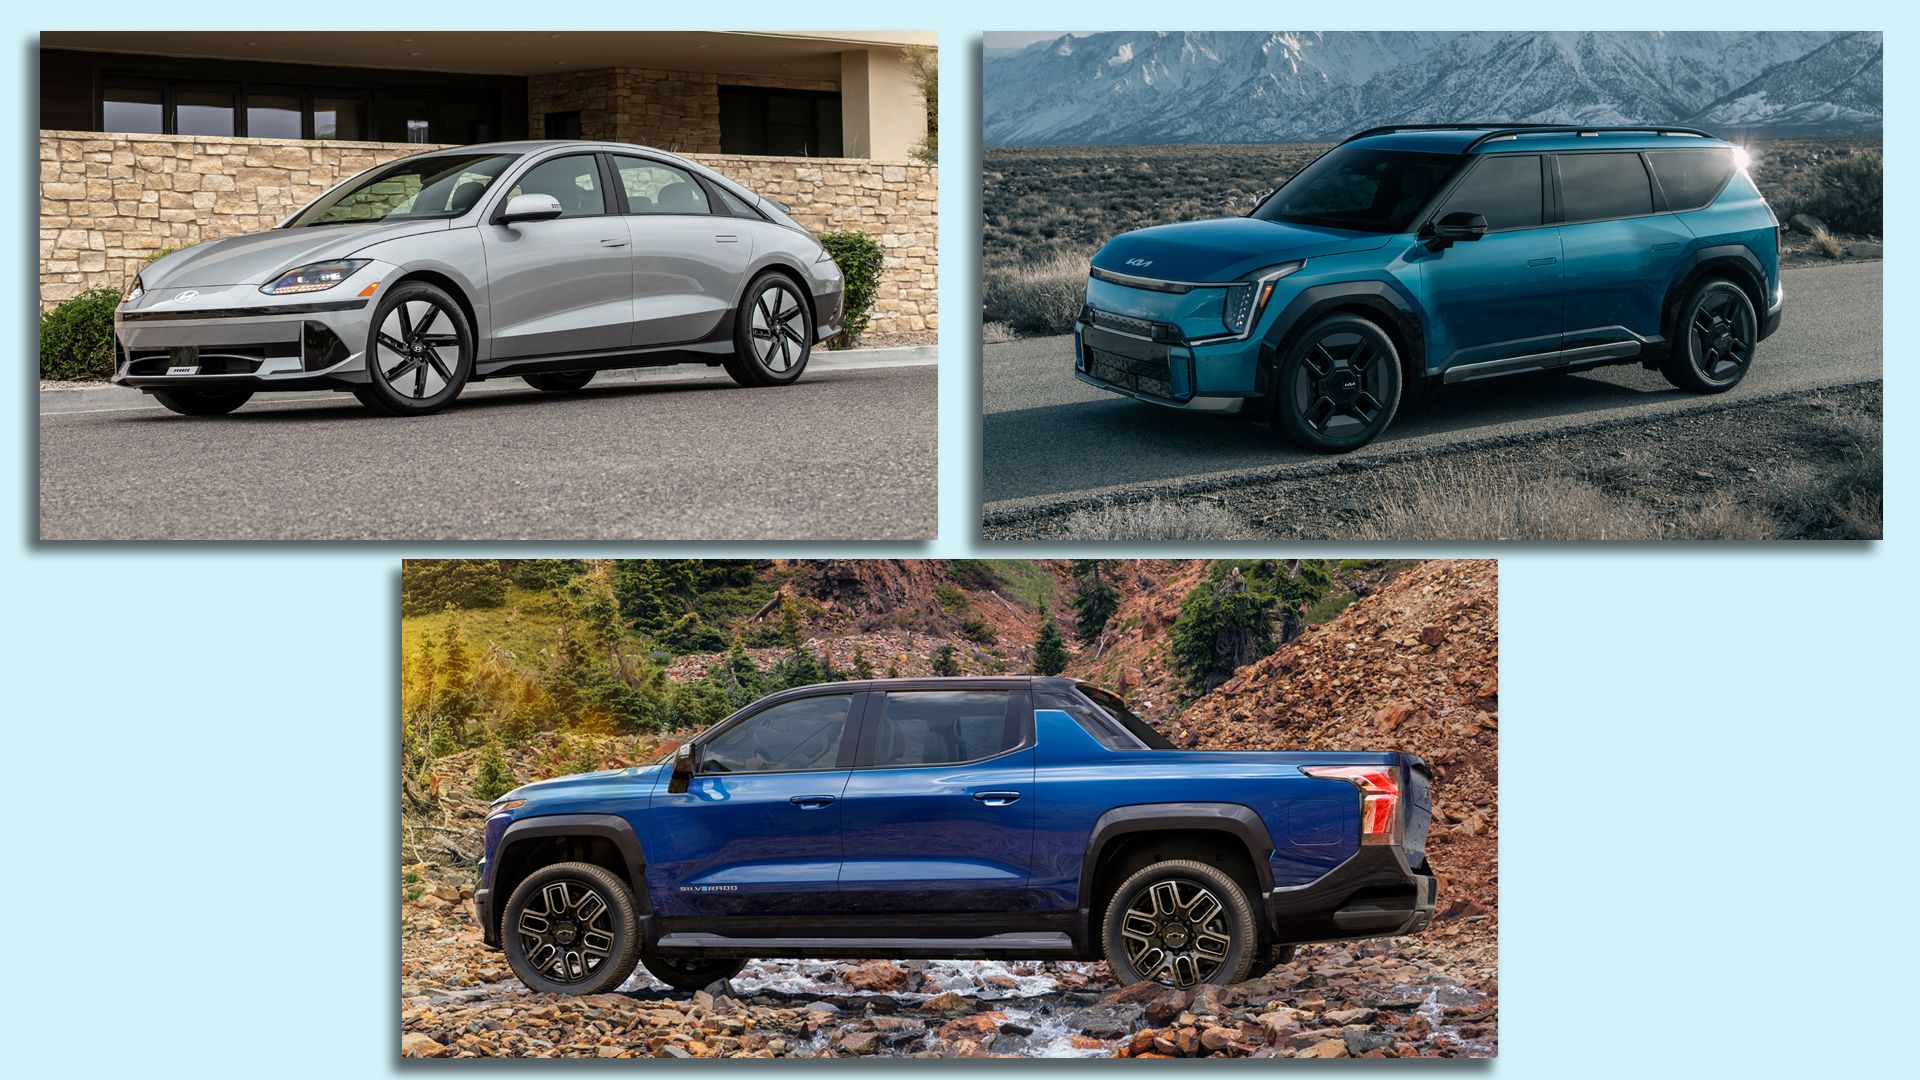 Images of 3 electric vehicles that are finalists for car, truck and SUV of the year: the Hyundai Ioniq 6, Kia EV9 and Chevrolet Silverado EV